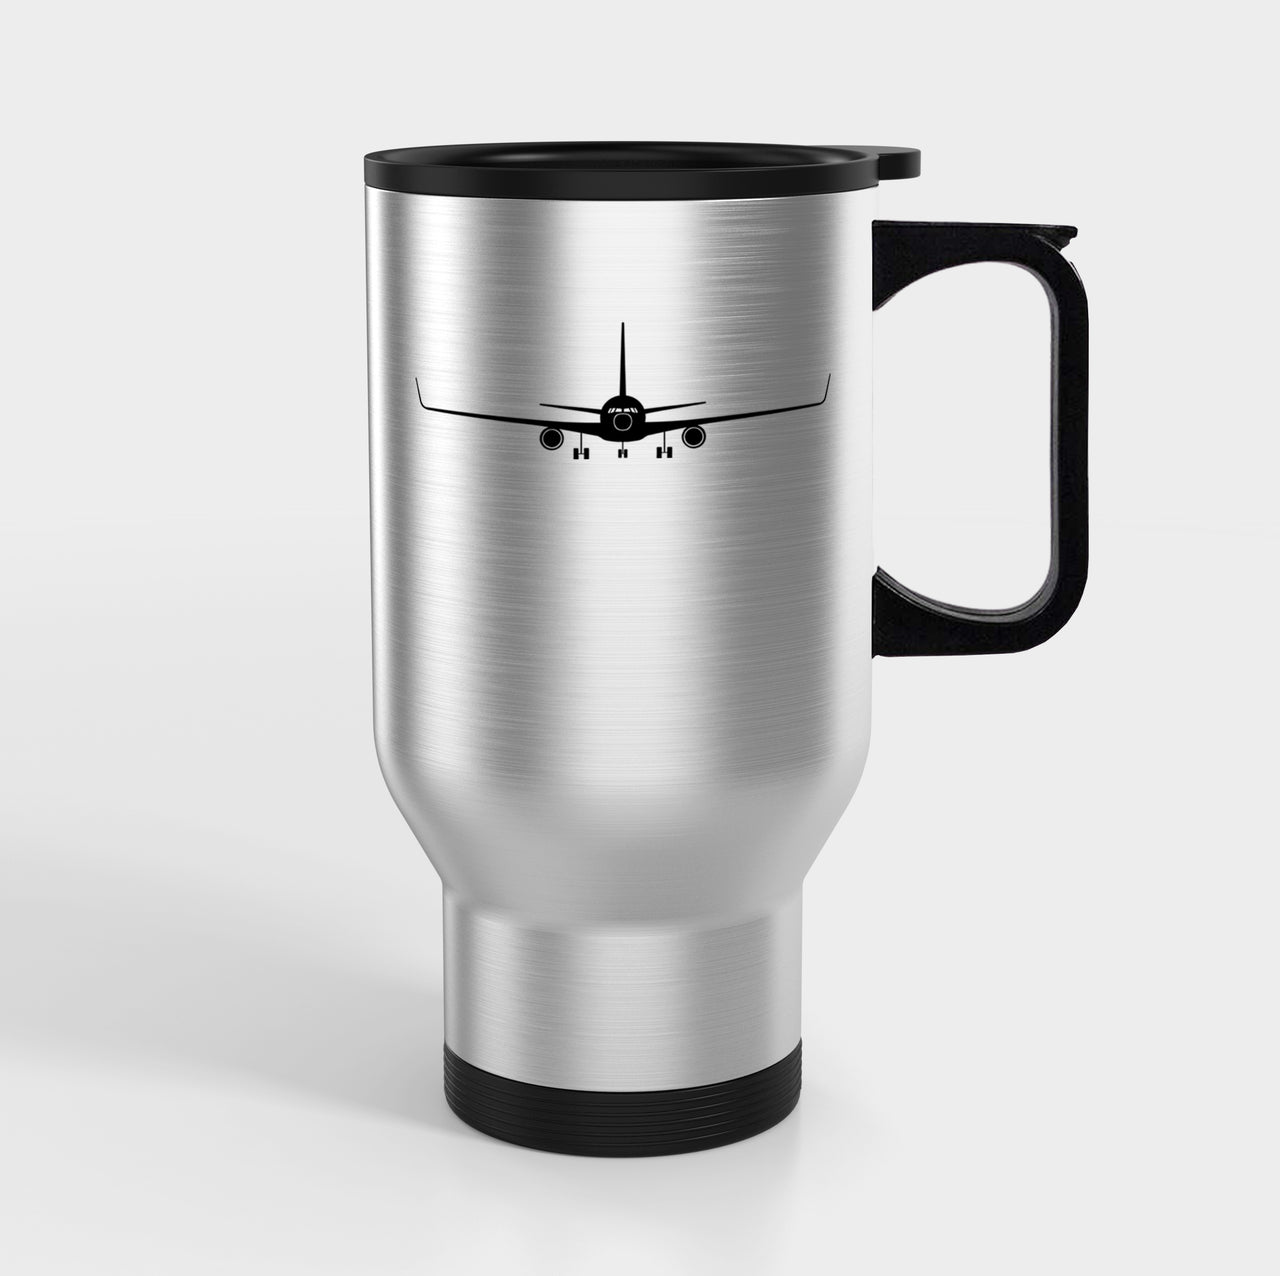 Boeing 767 Silhouette Designed Travel Mugs (With Holder)